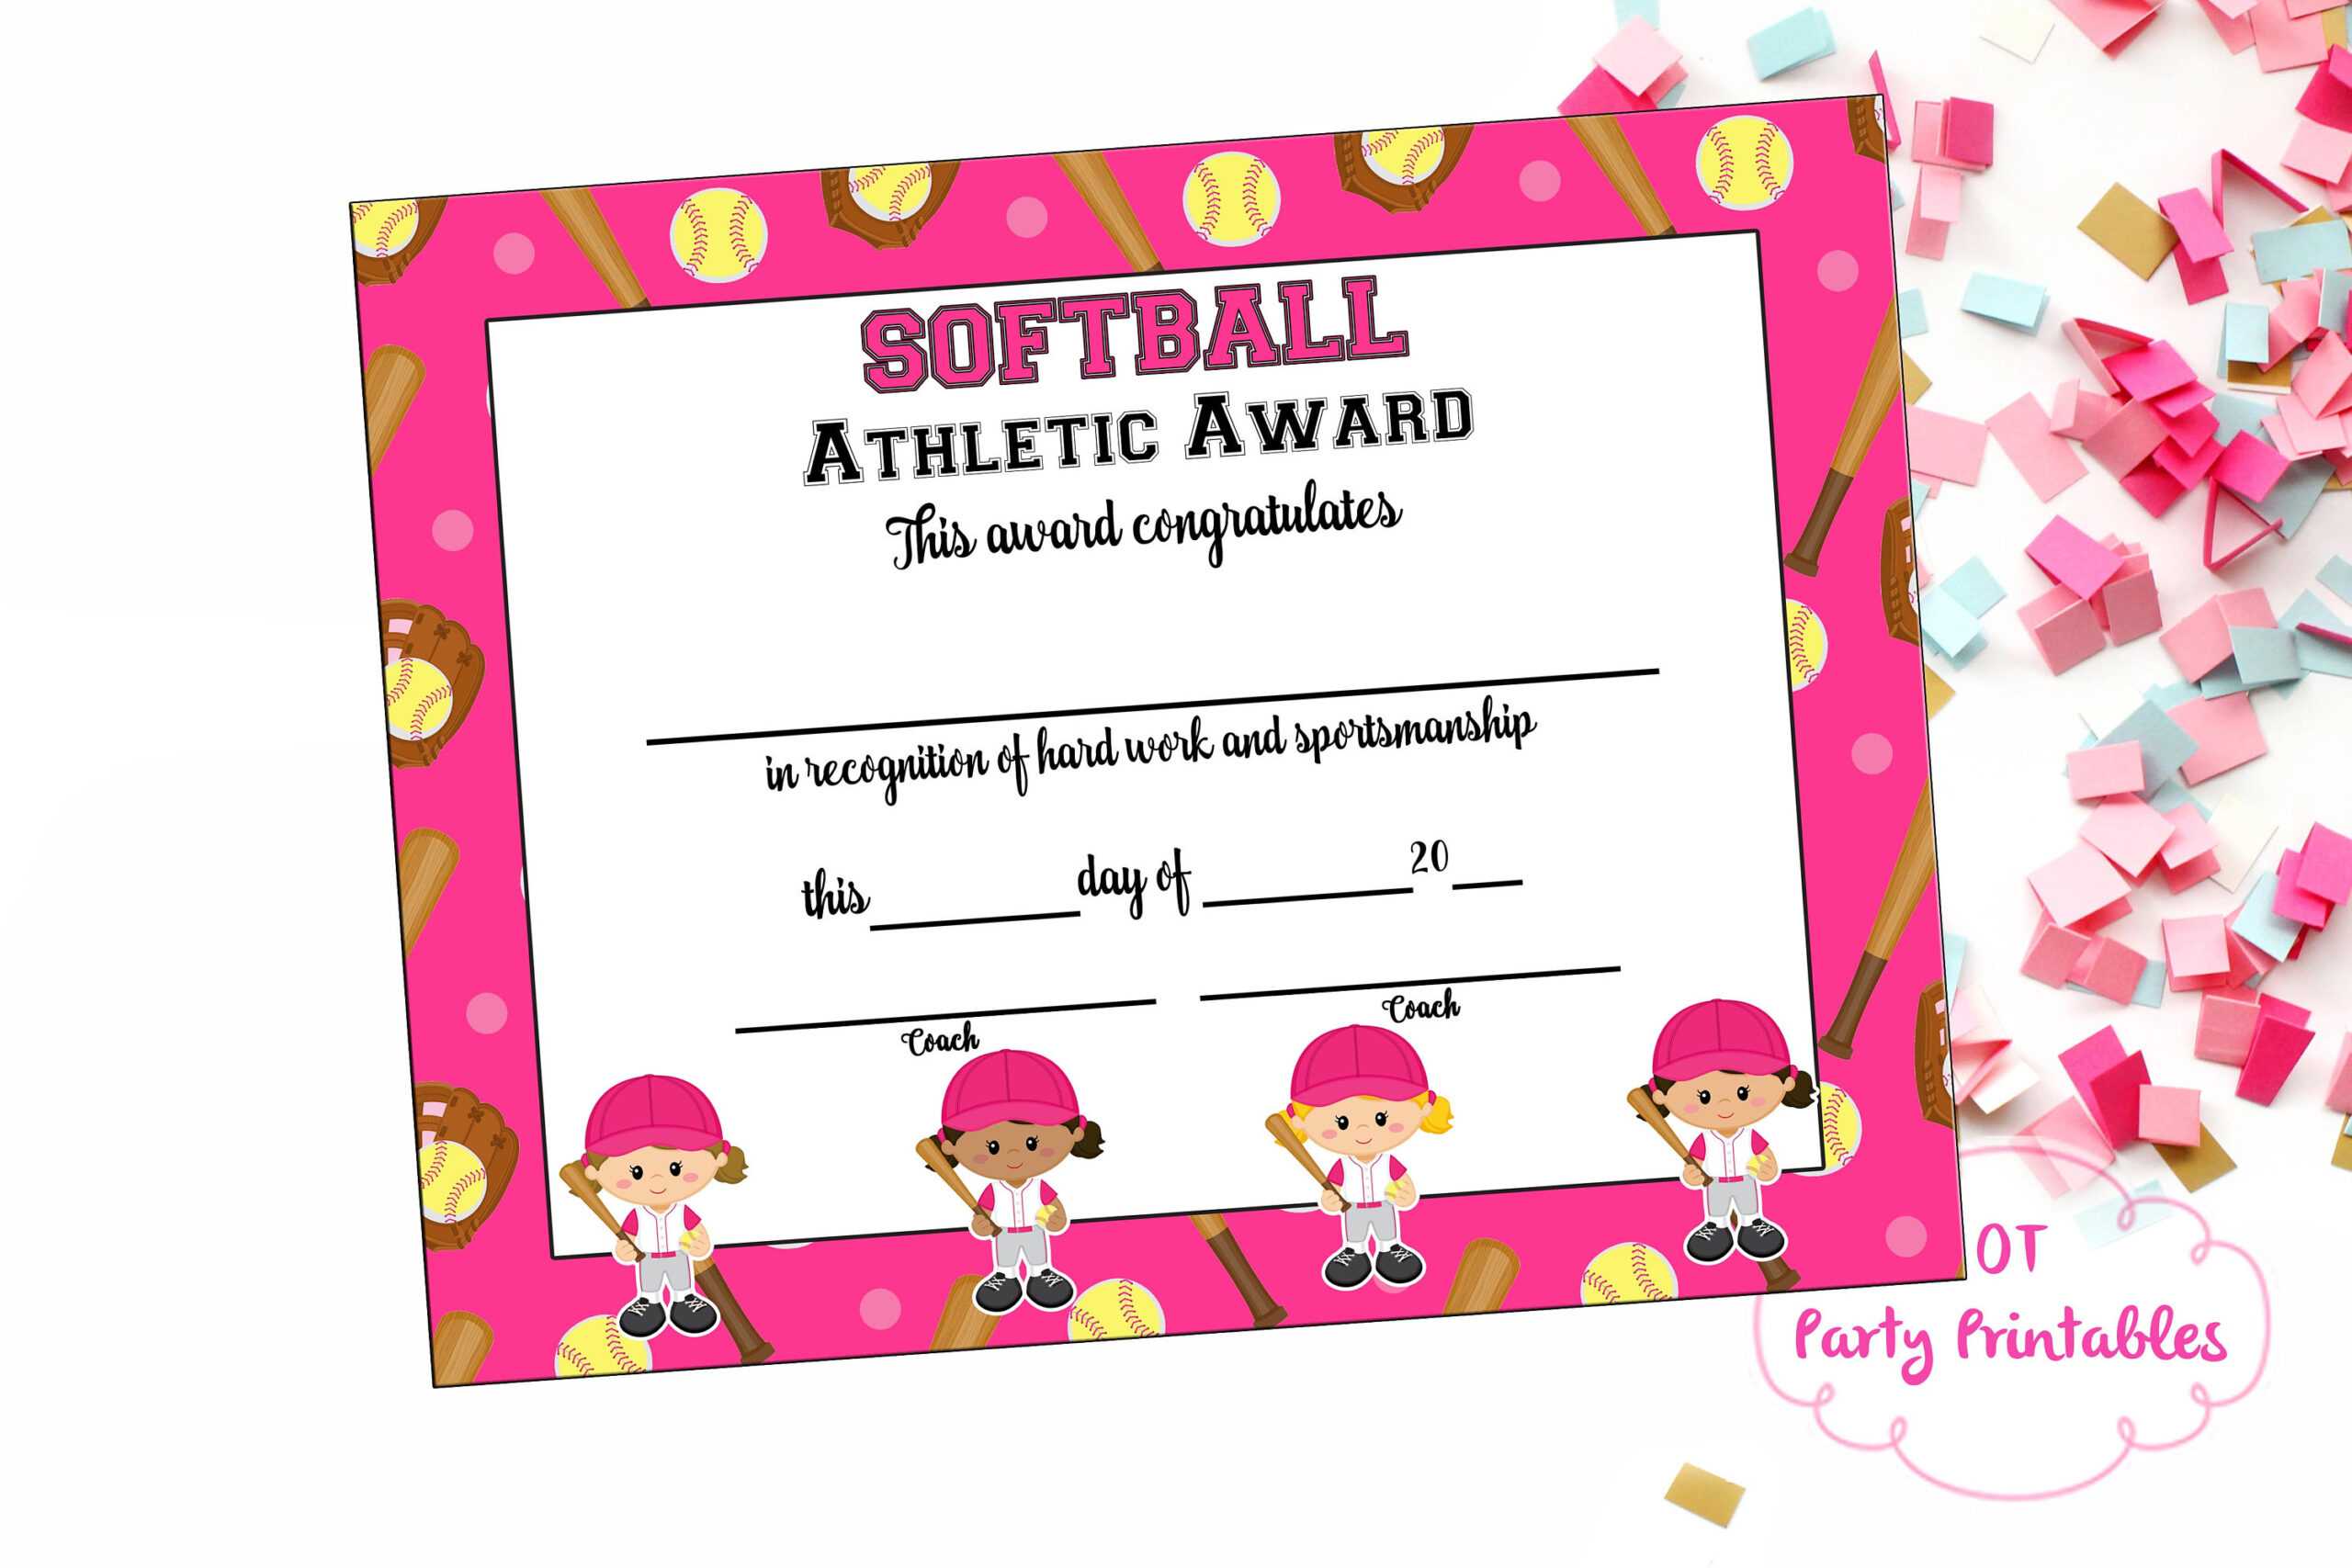 Softball Certificate Of Achievement – Softball Award – Print At Home –  Softball Mvp – Softball Certificate Of Completion – Sports Award Within Softball Award Certificate Template